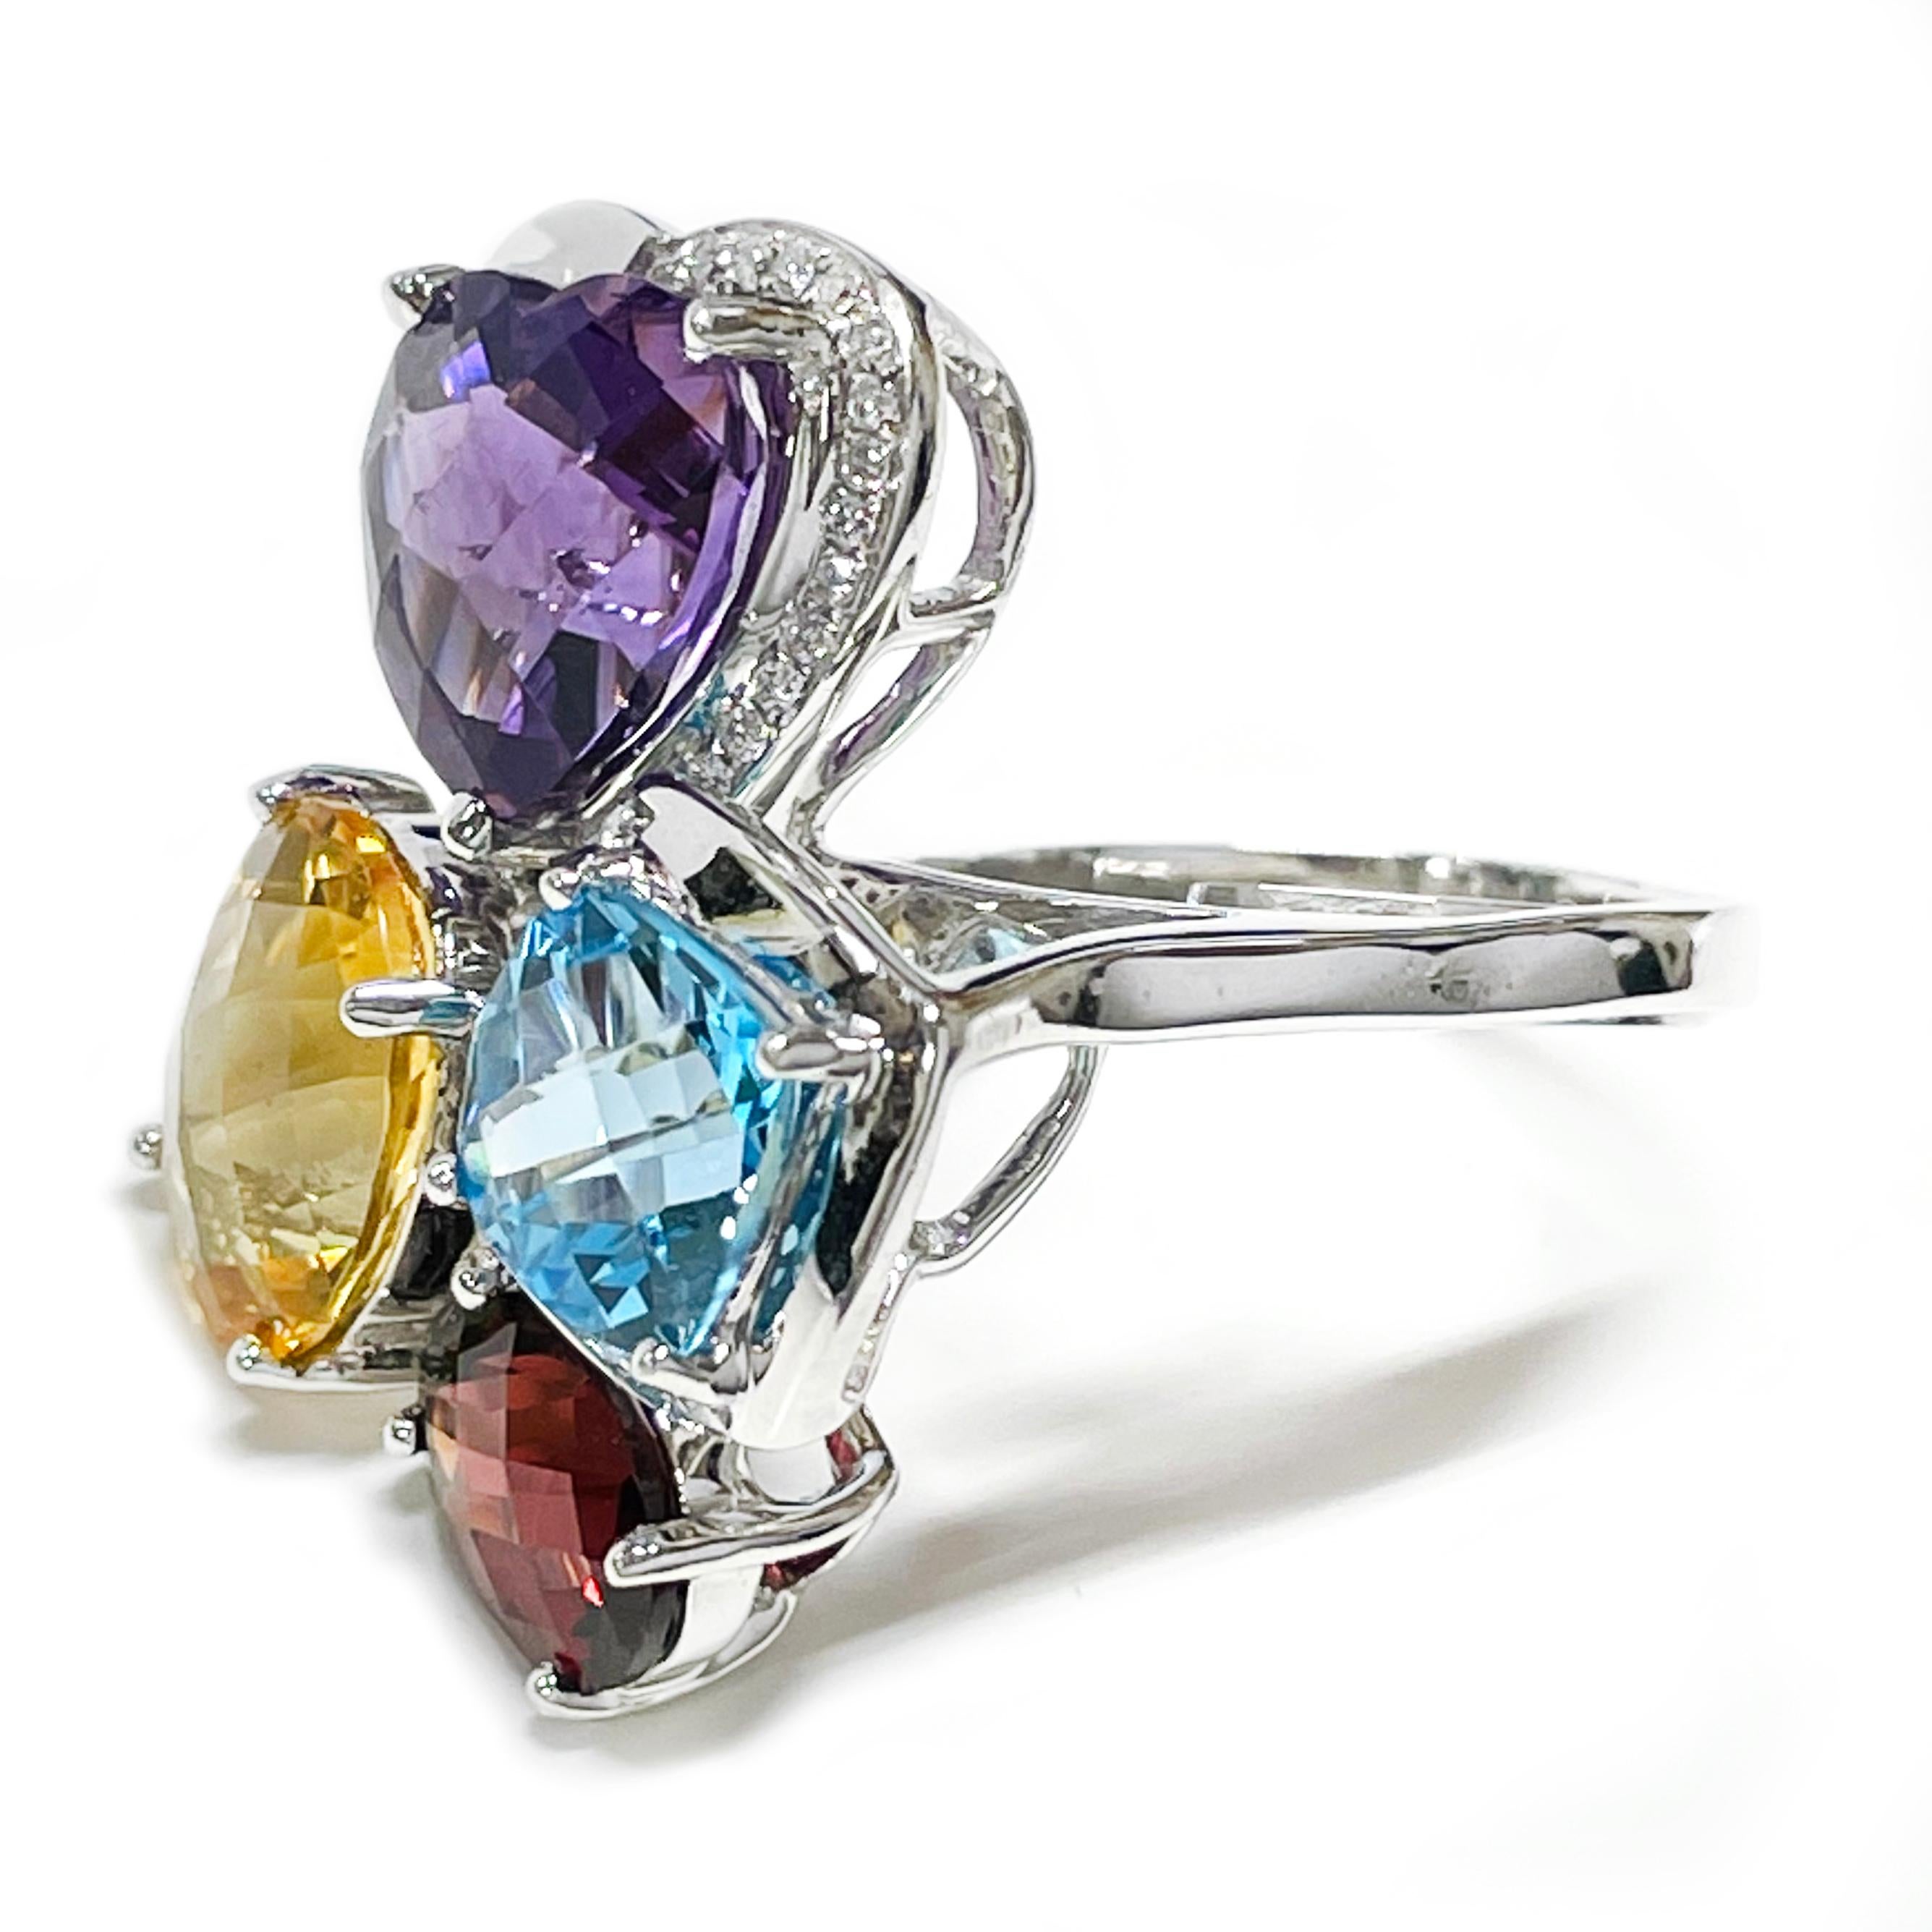 14 Karat White Gold Multi-Gemstone Diamond Ring. The cluster ring features a heart-shaped Amethyst, oval-cut Citrine, cushion-cut blue Topaz, oval-set Garnet and round melee diamonds. There is a total of thirty-one melee diamonds that adorn half the